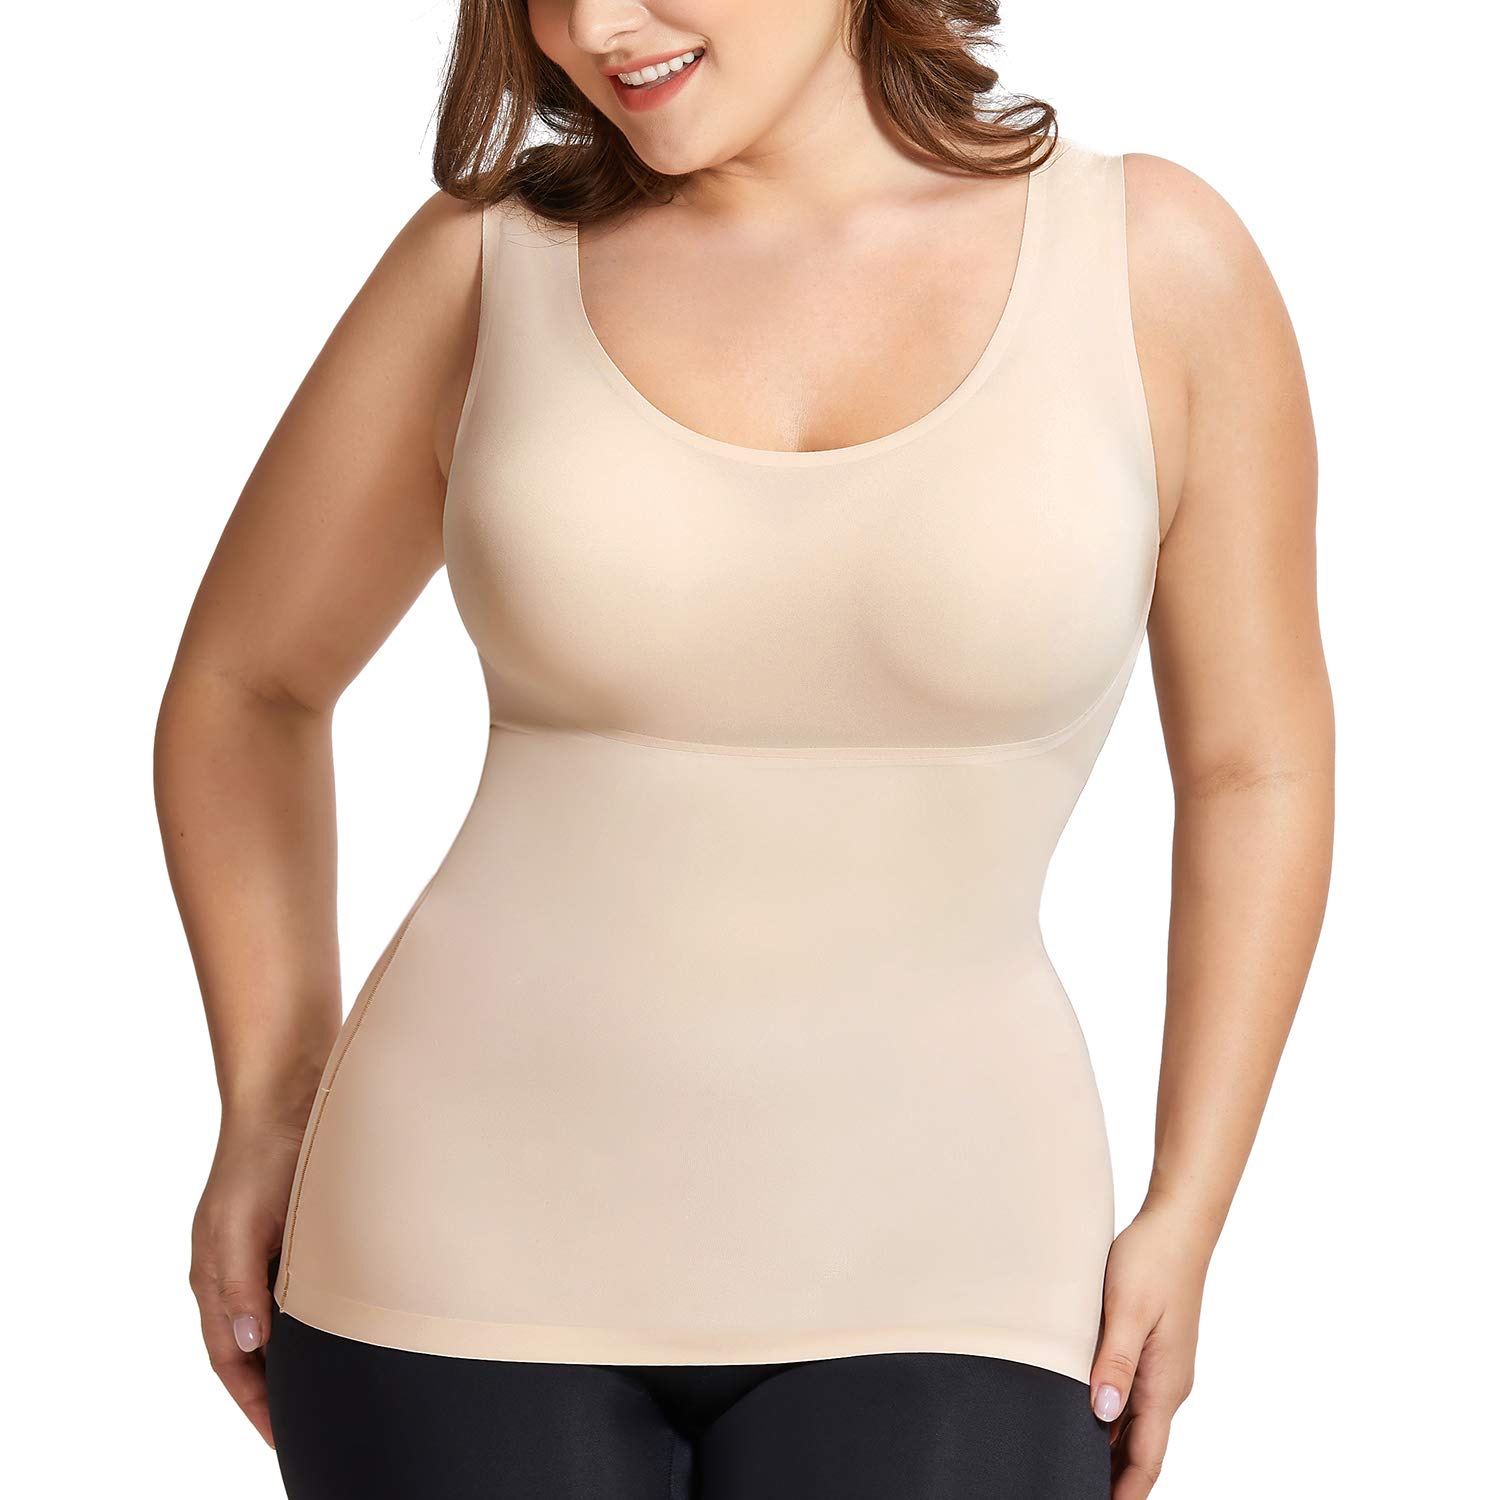 MD Shapewear Womens Tank Tops Body Shaper Camisole For Tummy Waist And Hips